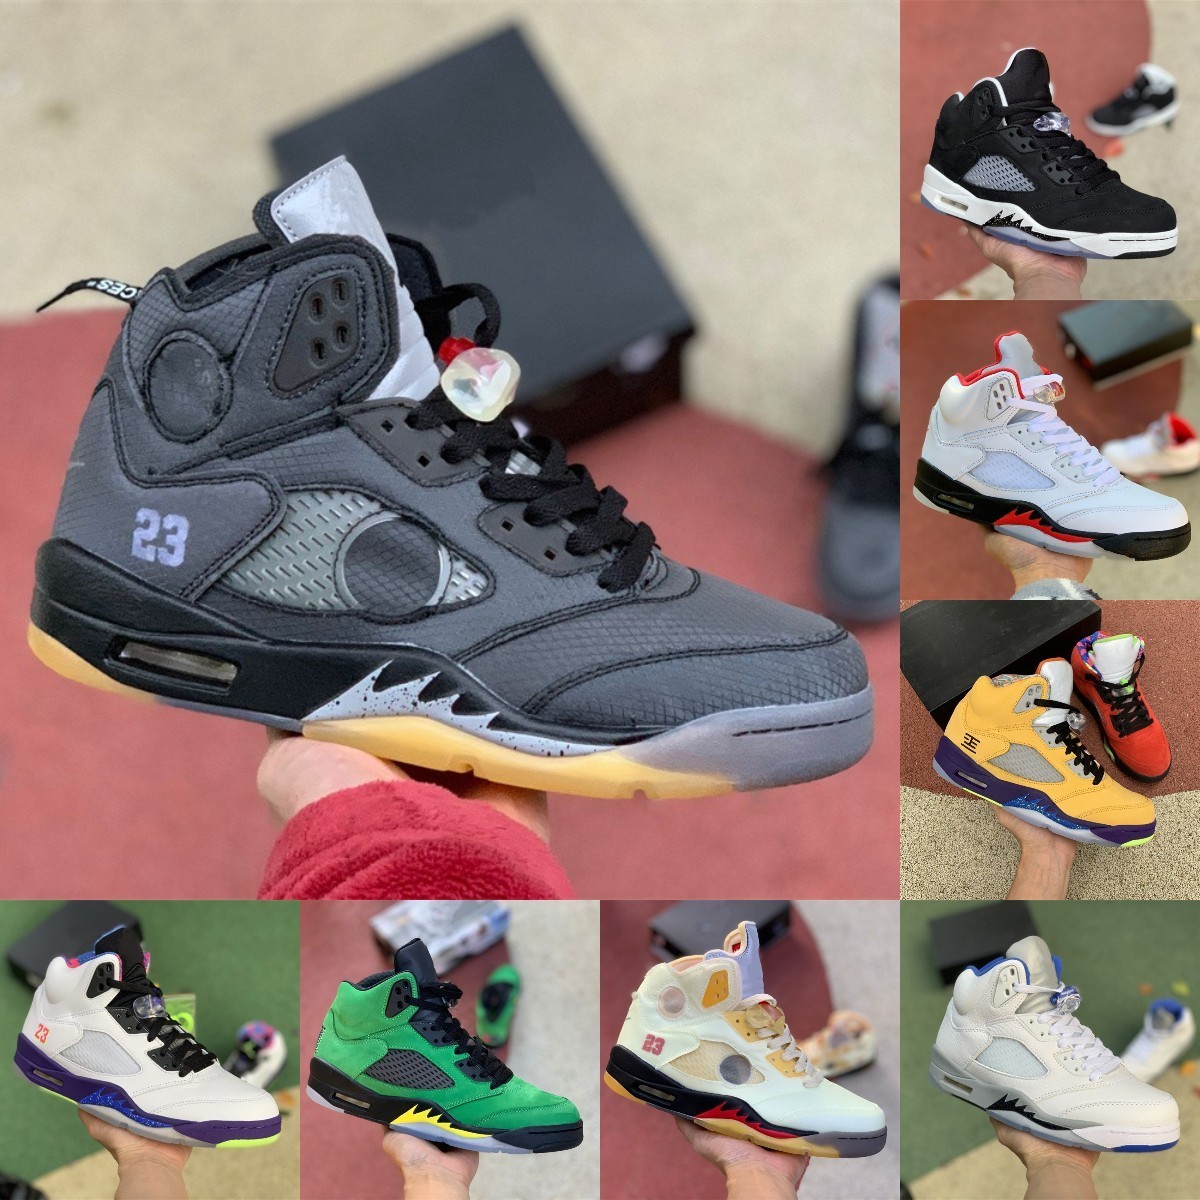 

Jumpman What The 5 5s High Basketball Shoes Mens Muslin Sail Stealth 2.0 Raging Bull Red TOP 3 Oreo Hyper Royal Oregon Ducks Ice Bred Alternate Bel Trainer Sneakers P55, Please contact us